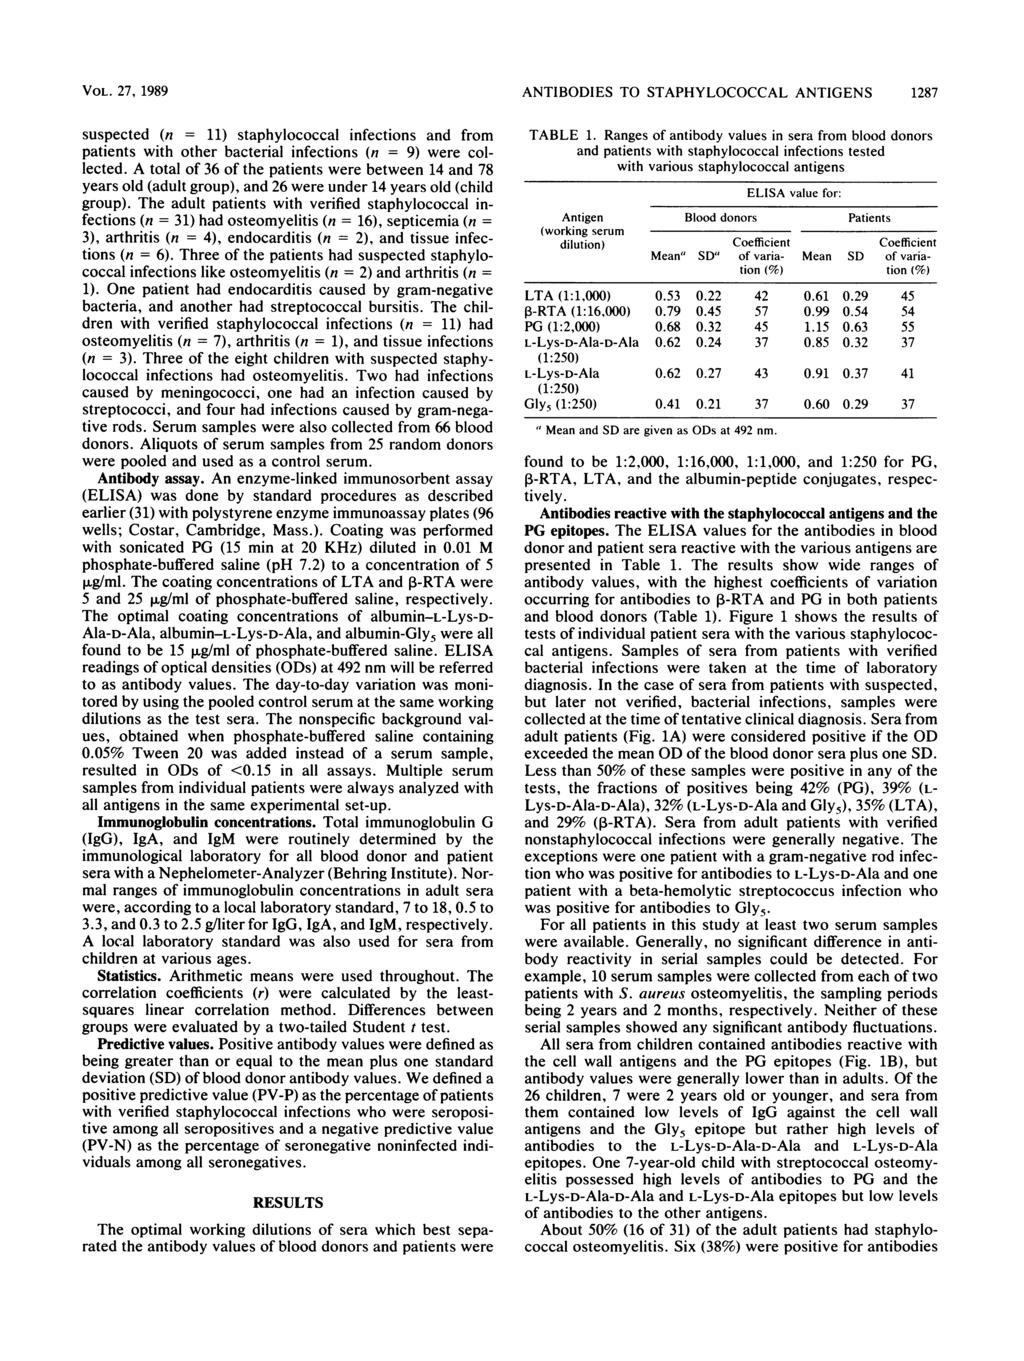 VOL. 27, 1989 suspected (n = 11) stphylococcl infections nd from ptients with other bcteril infections (n = 9) were collected.